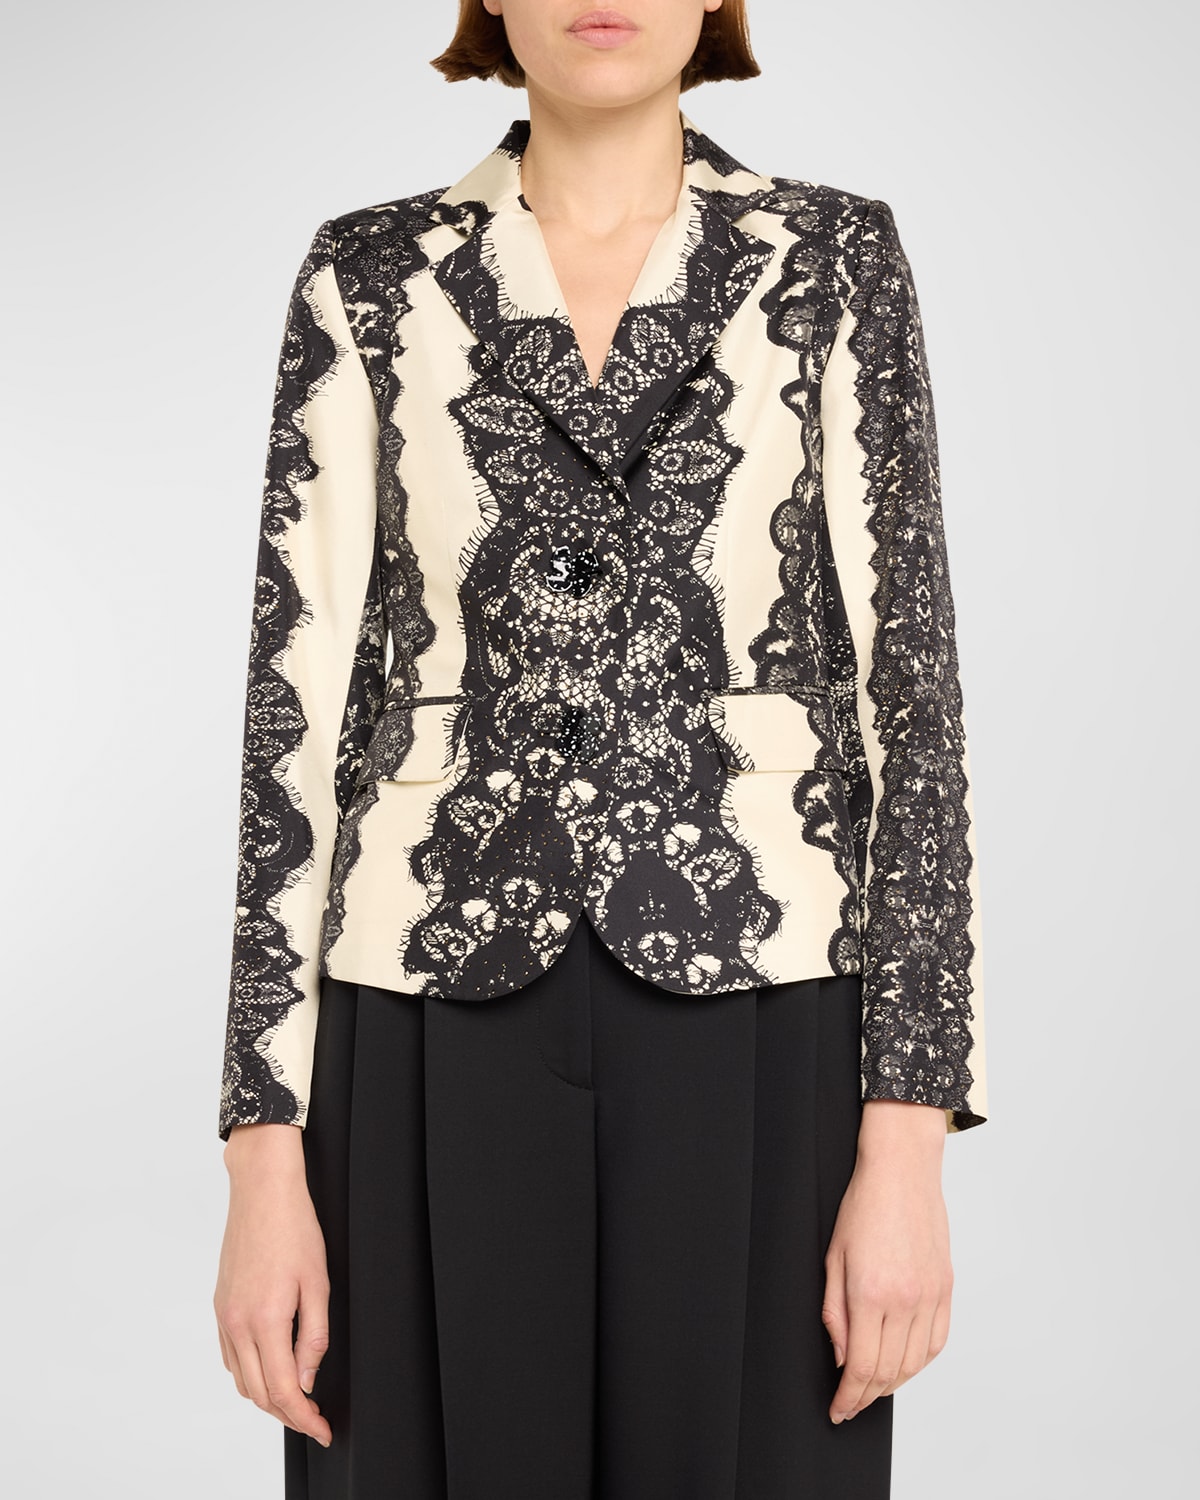 Venetian Lace Short Blazer Jacket with Crystal Buttons